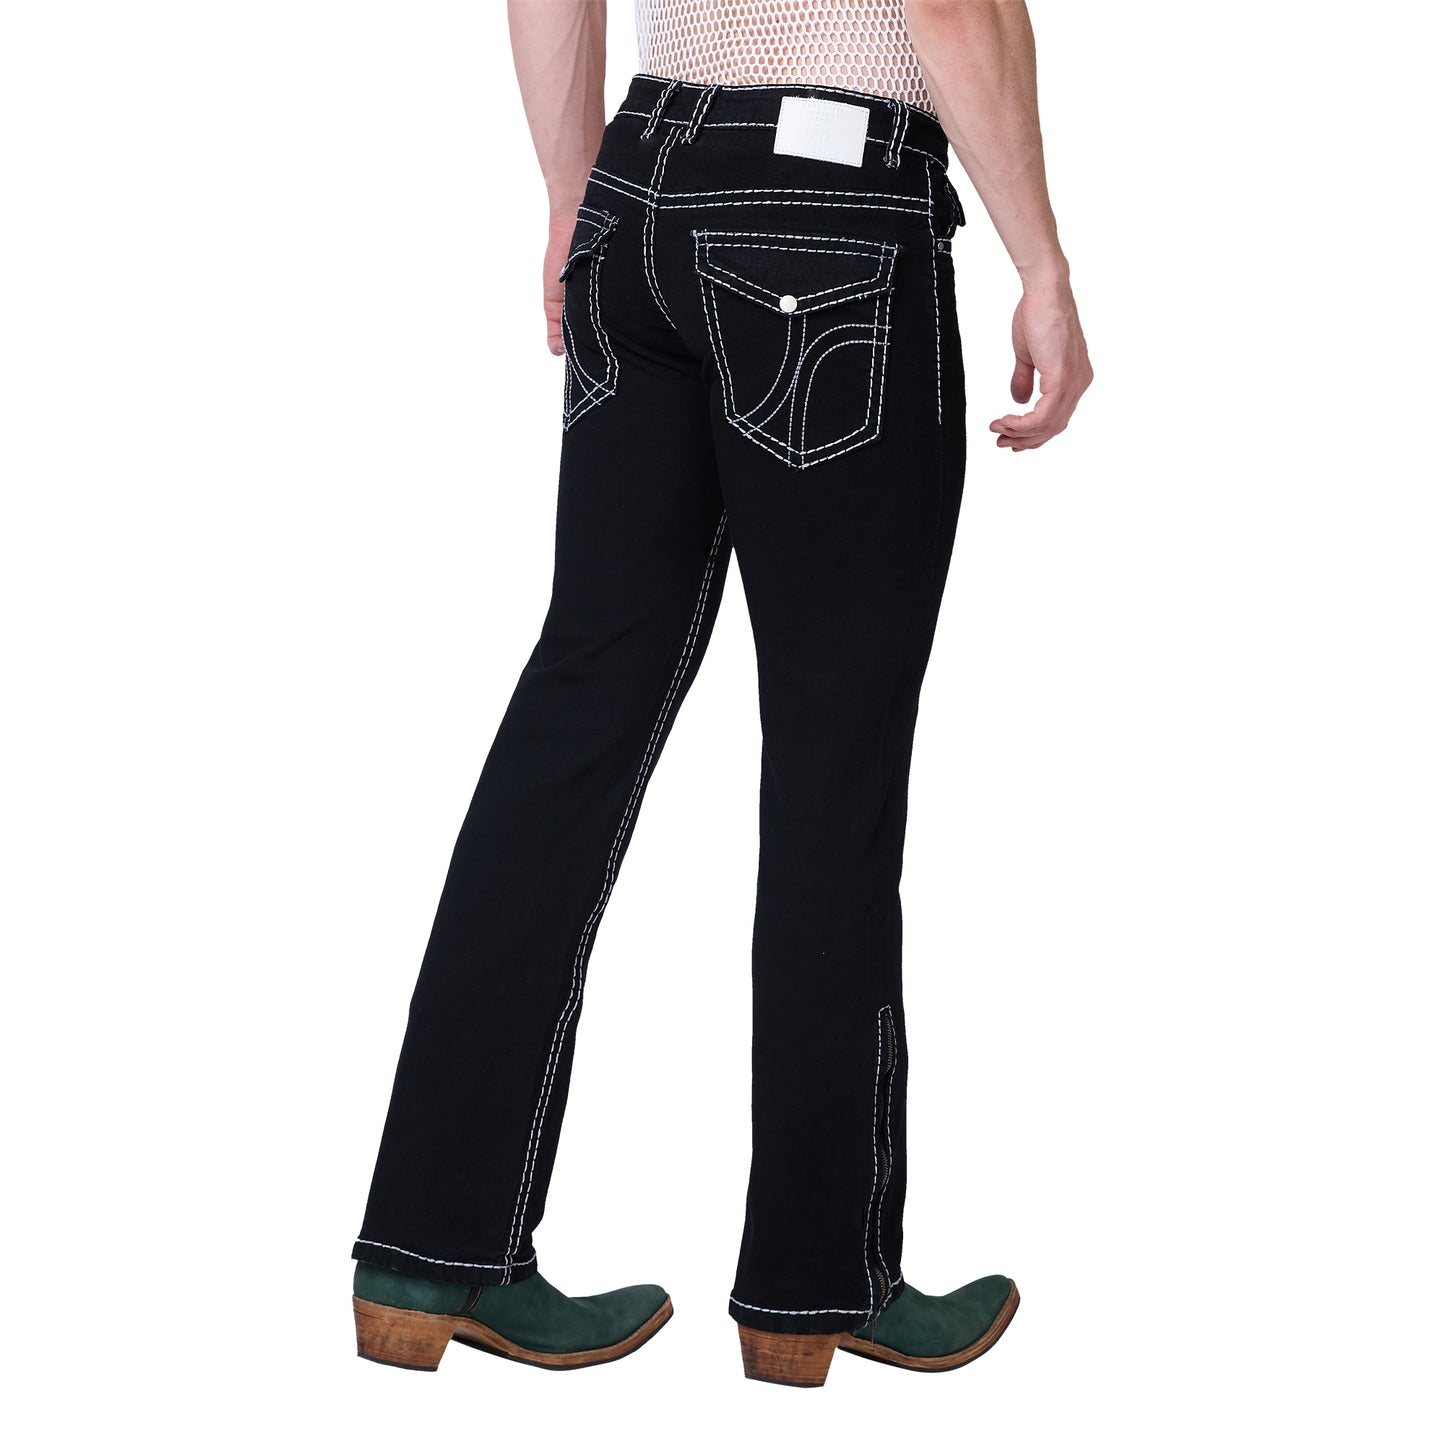 Mens Black Bootcut Slim Fit Jeans Strechable With White Saddle Stitch